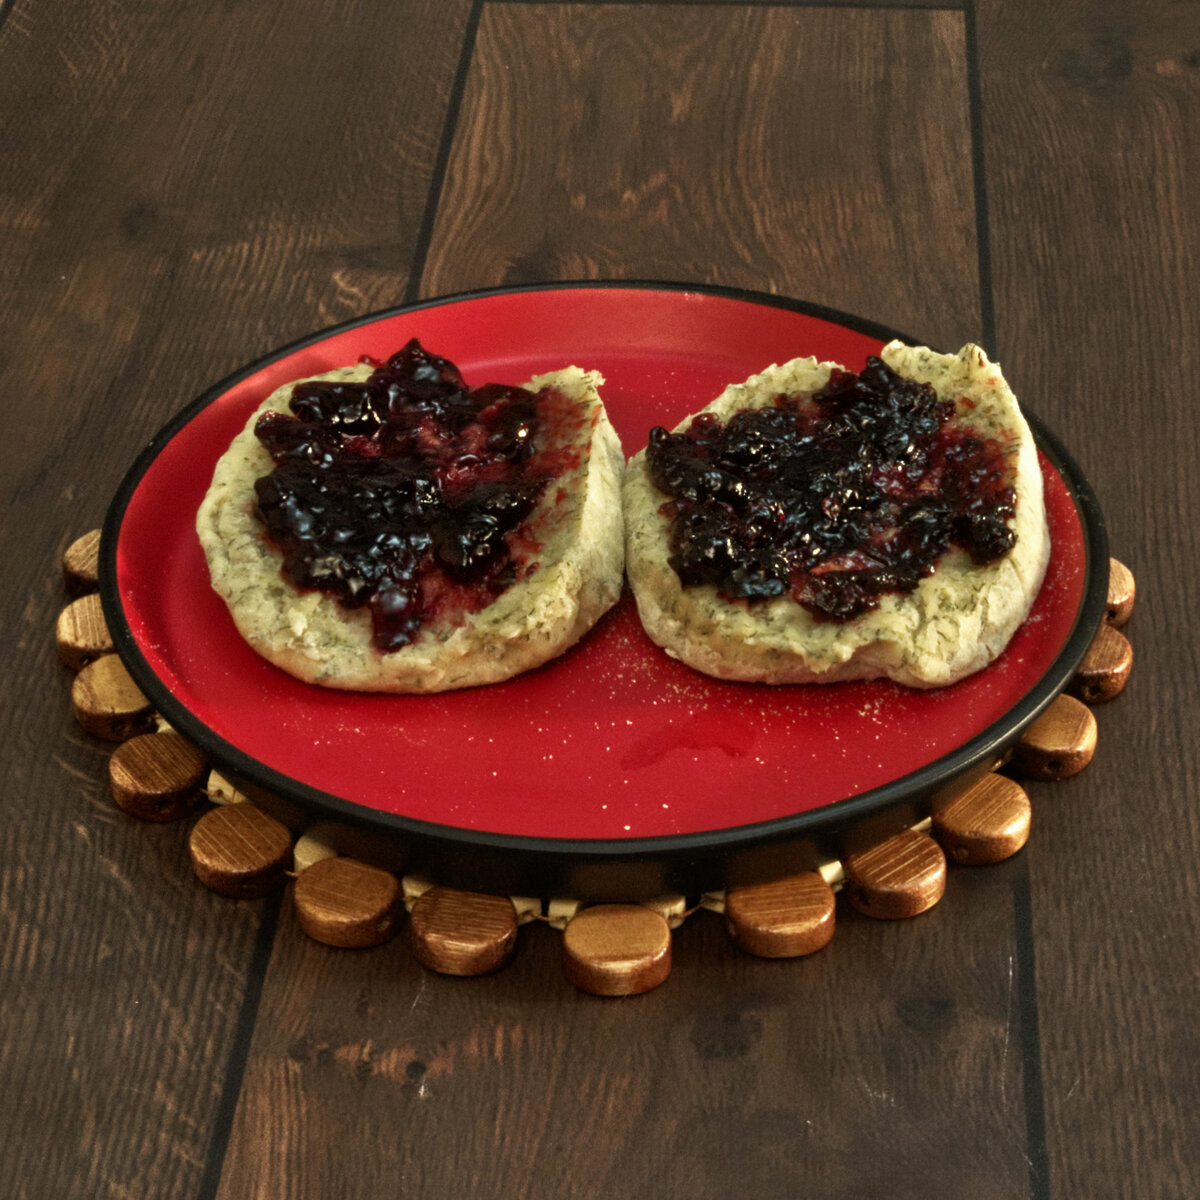 Golden Dill English Muffins with Black Currant Spread